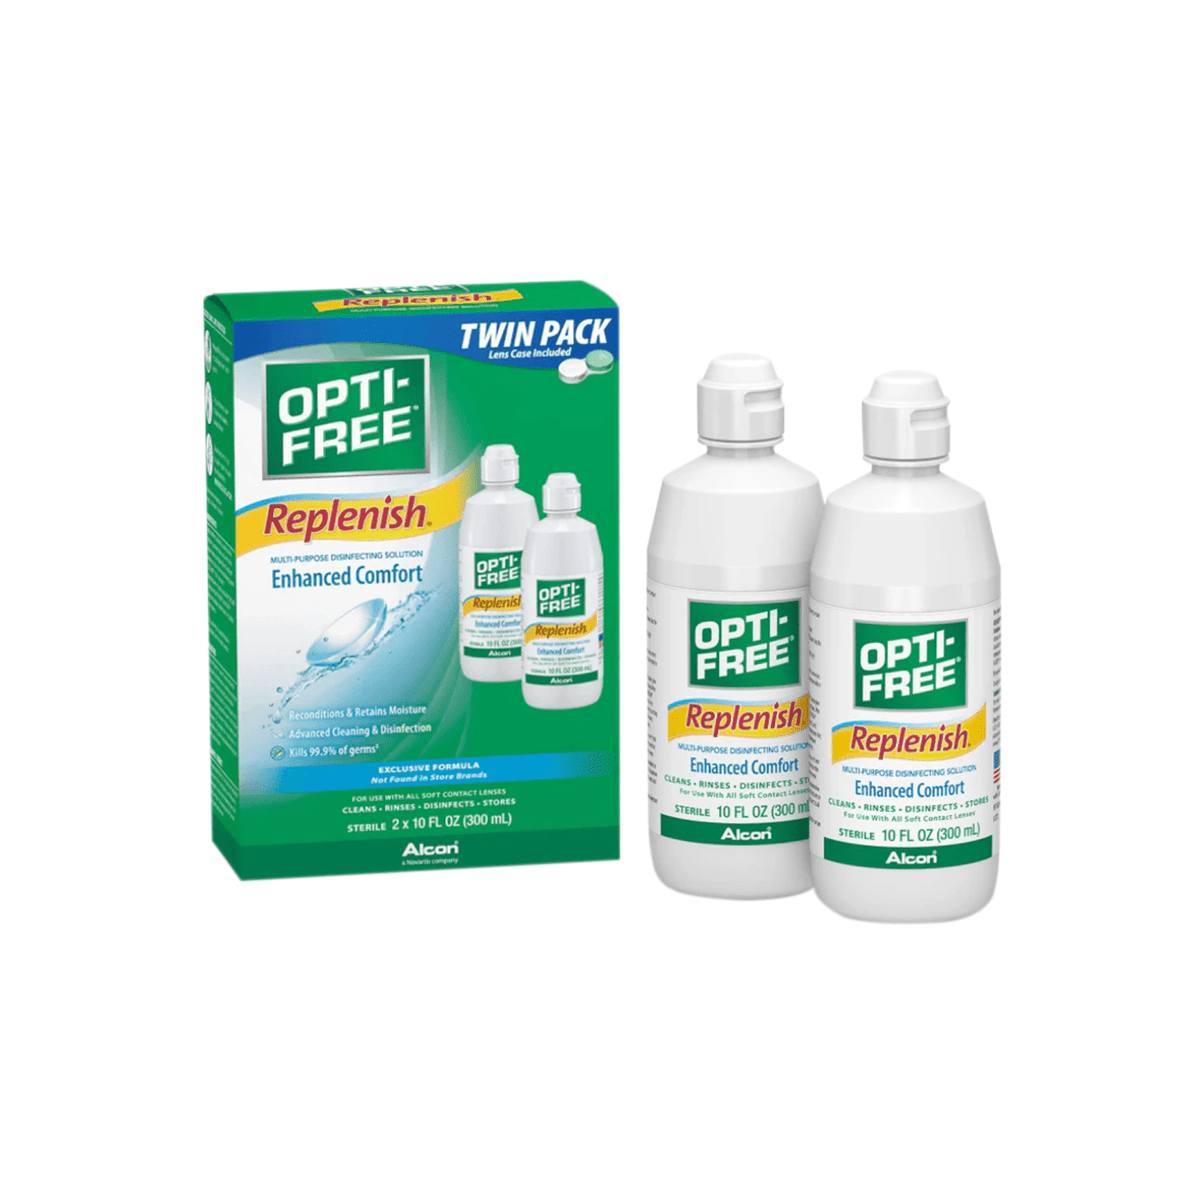 Opti - Free Replenish Multi - Purpose Disinfecting Solution with Lens Case, 20 Fl Oz (pack of 2) - Dryeye Rescue